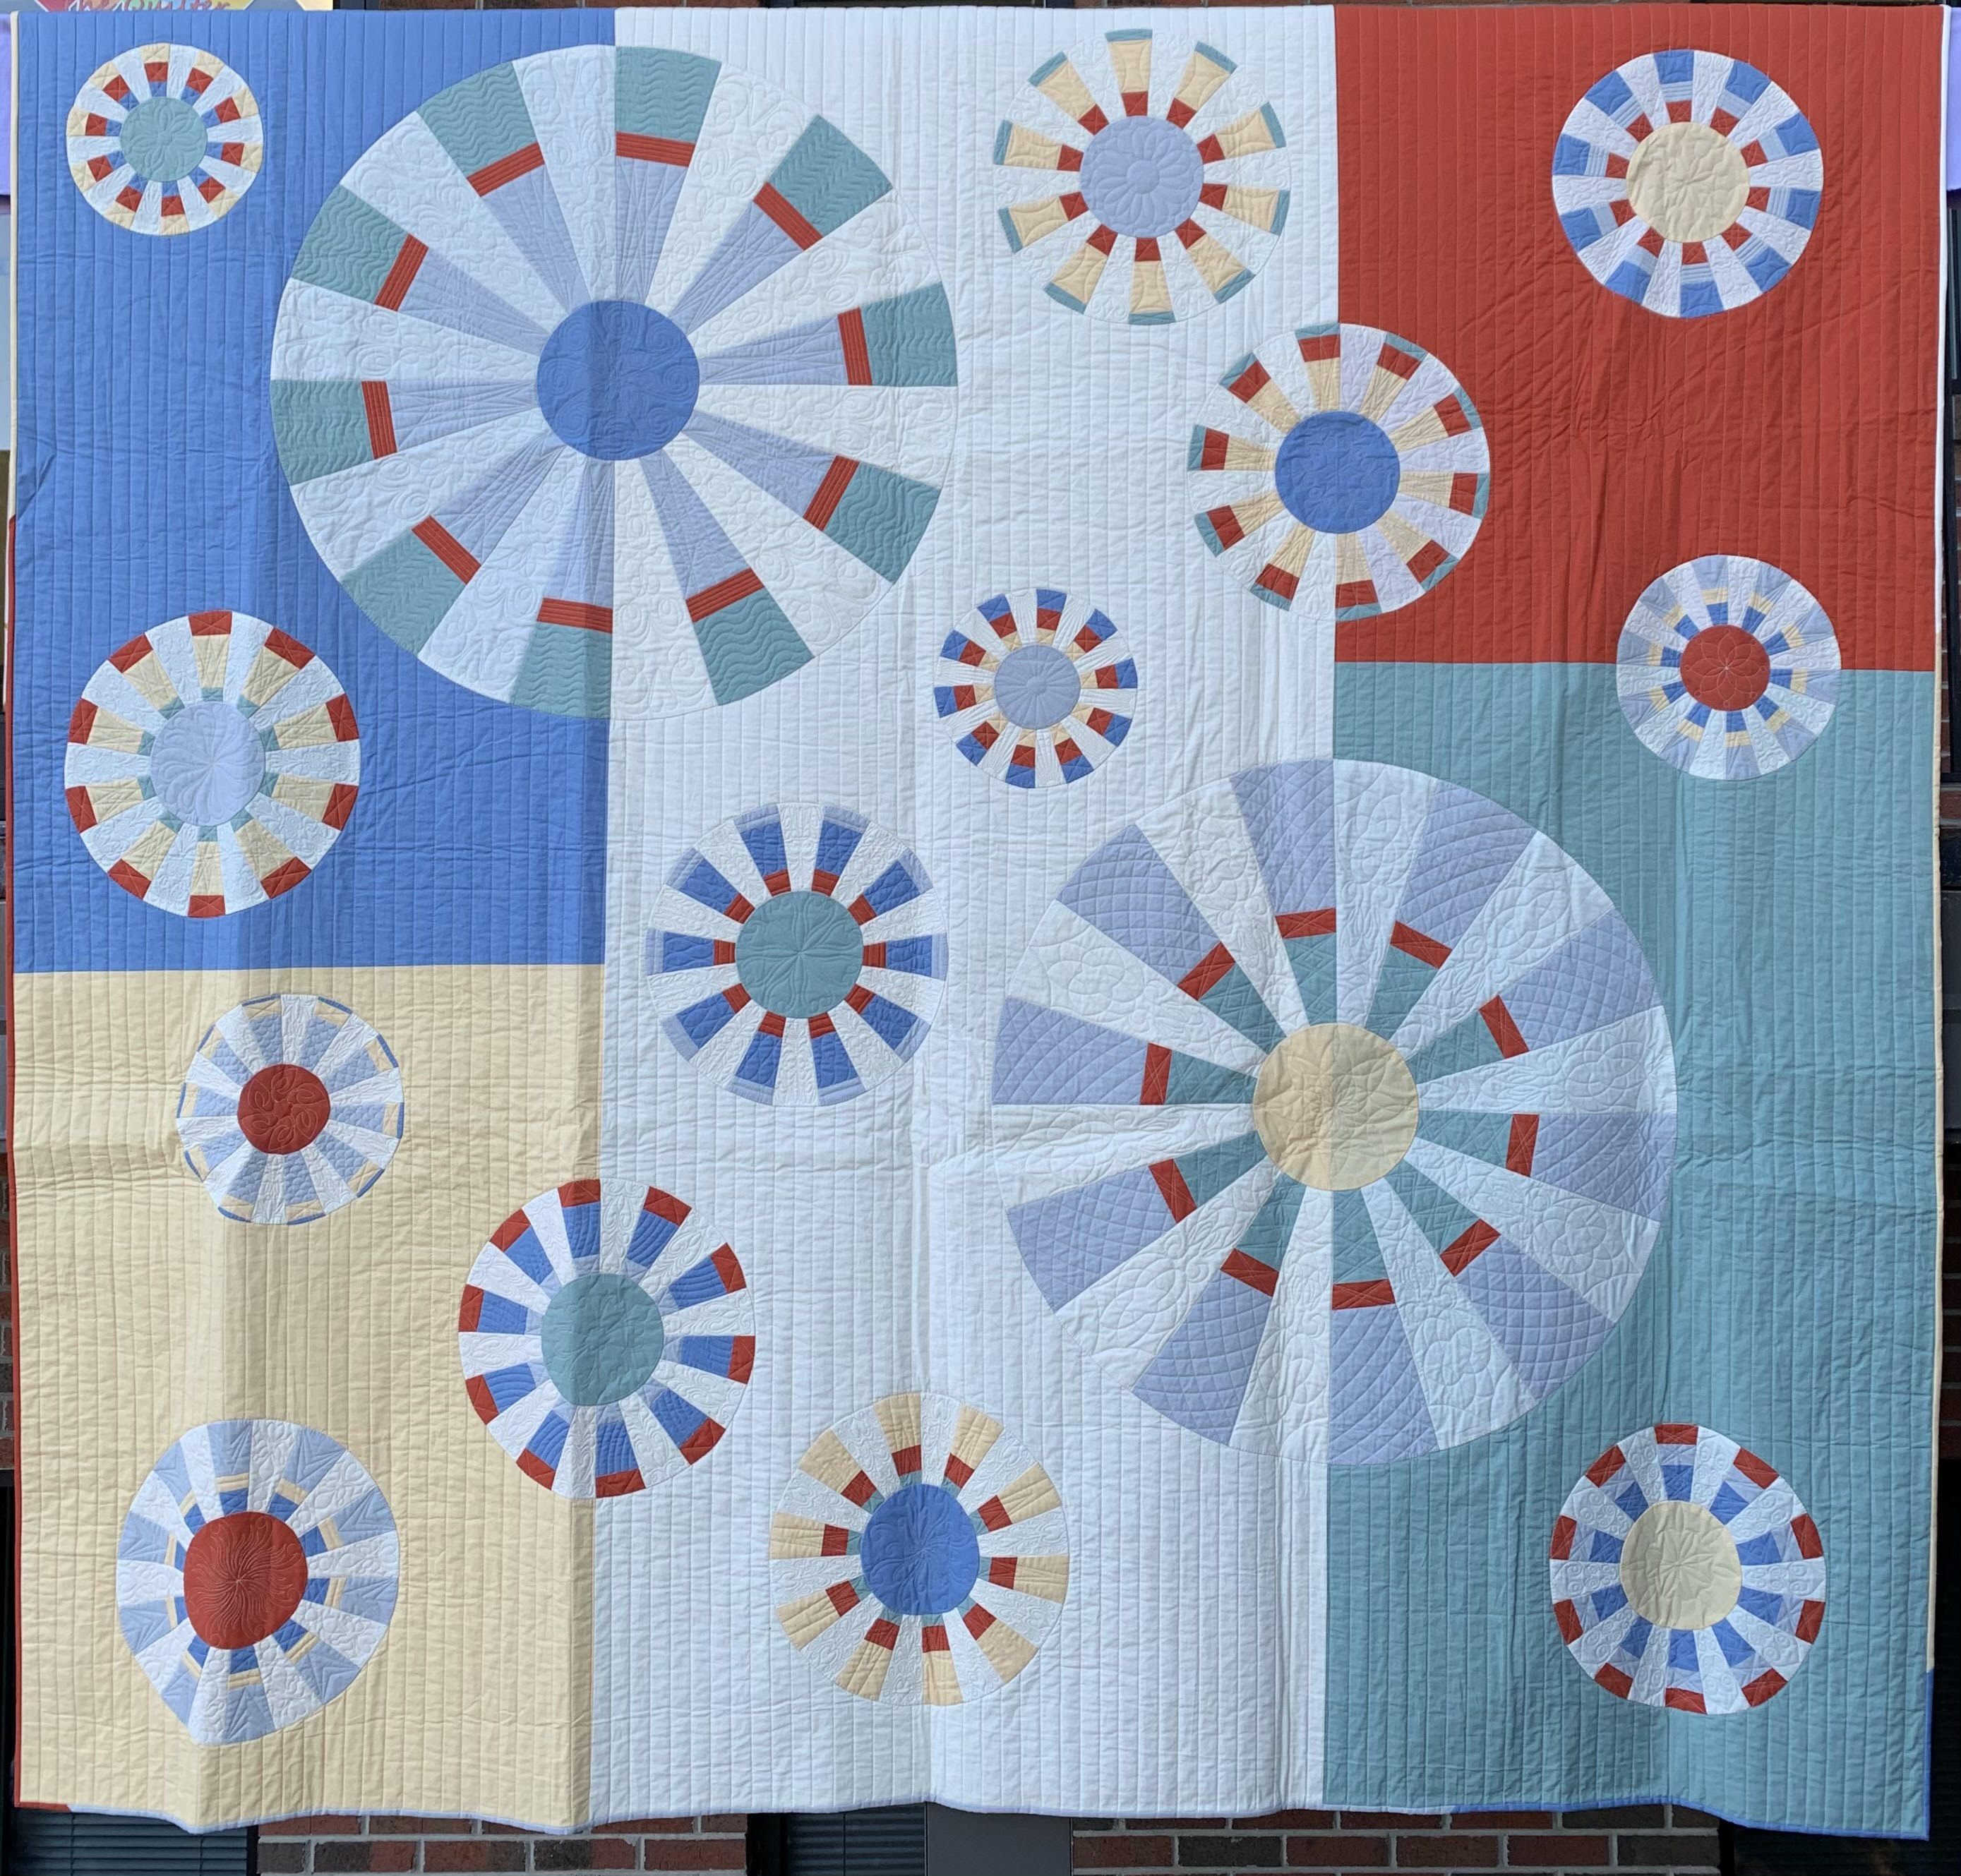 Artisan Focus Event - Unique Art Quilts from Gujarat — Stitch by Stitch -  Contemporary handmade textiles from India & Nepal